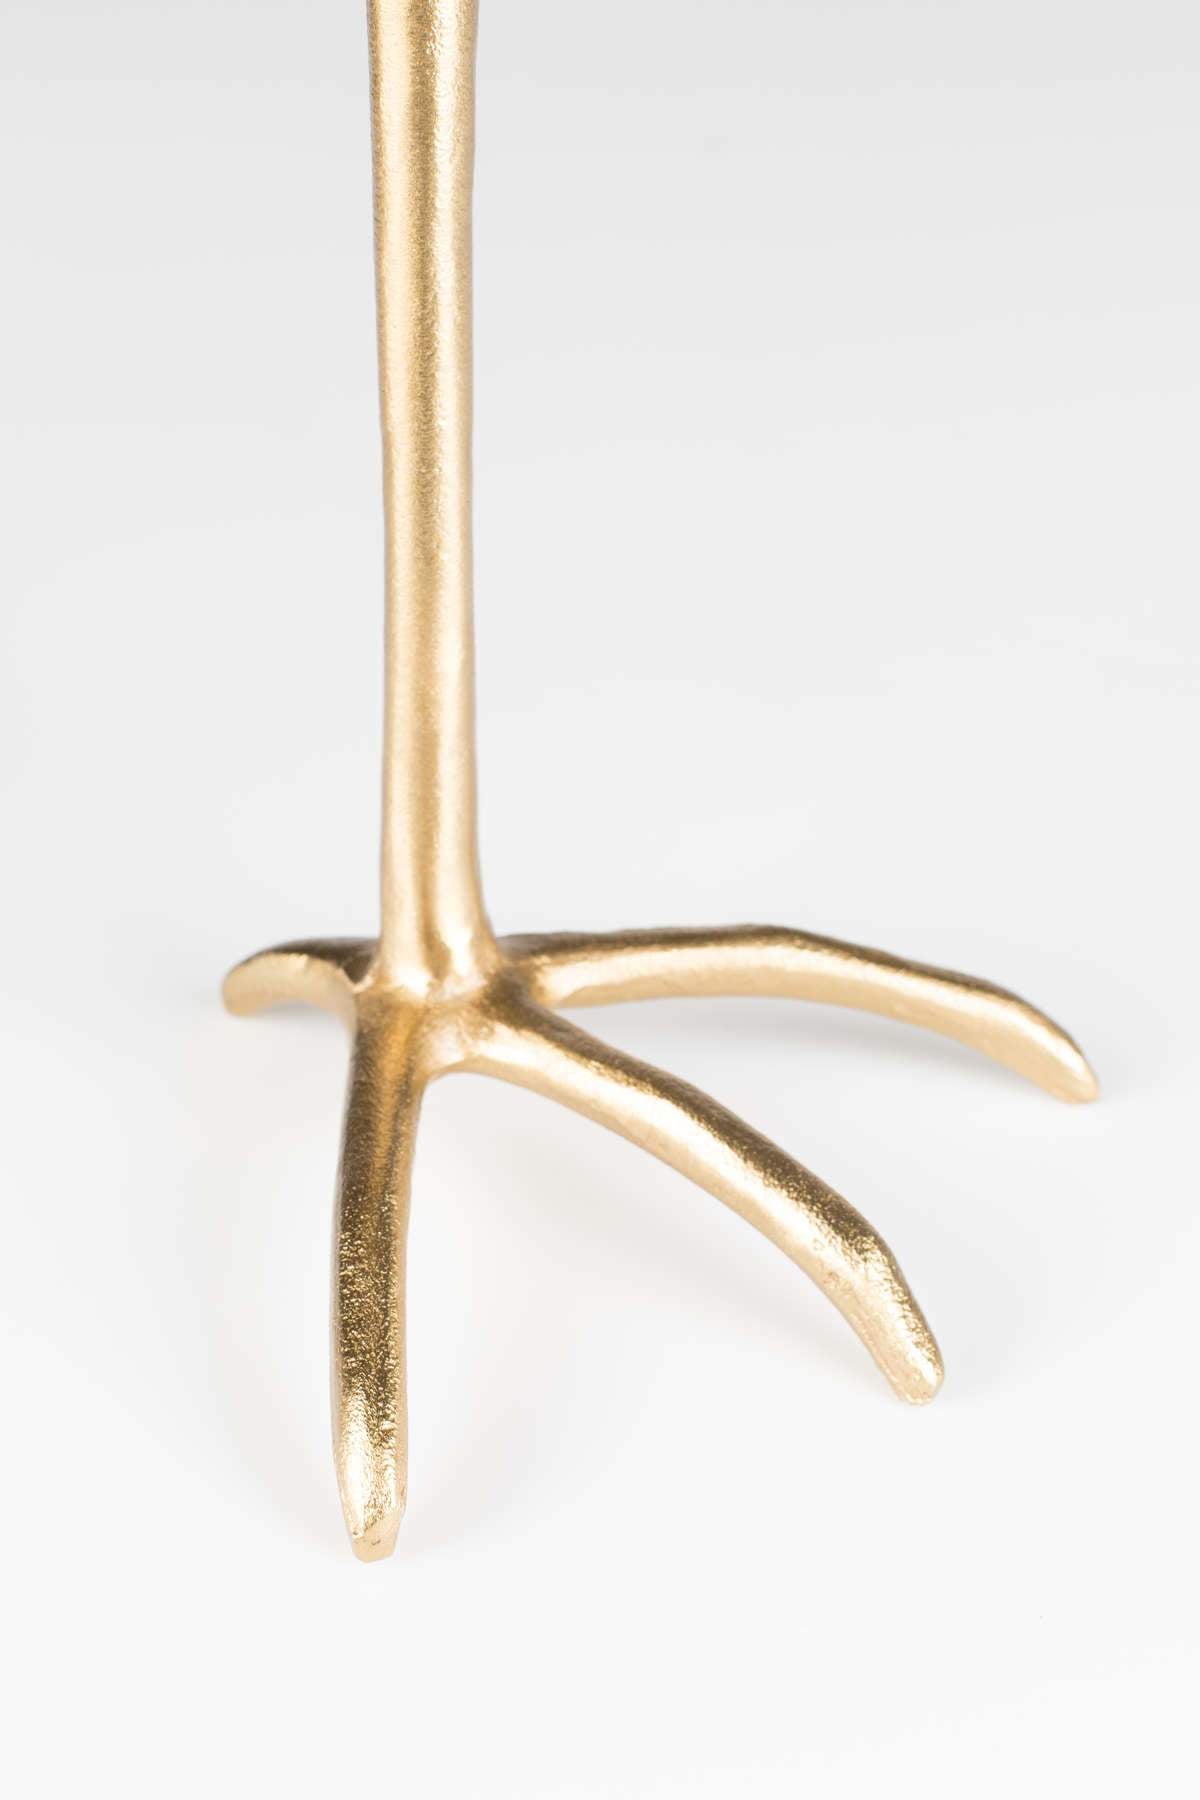 As for the interior design, the candles are almost too penny. But for a reason: an elegant candle holder is one of the simplest interior design hacks. Meet the Bold Monkey's the Golden Heron candlestick: an immediate atmosphere, with a bit of good humor.